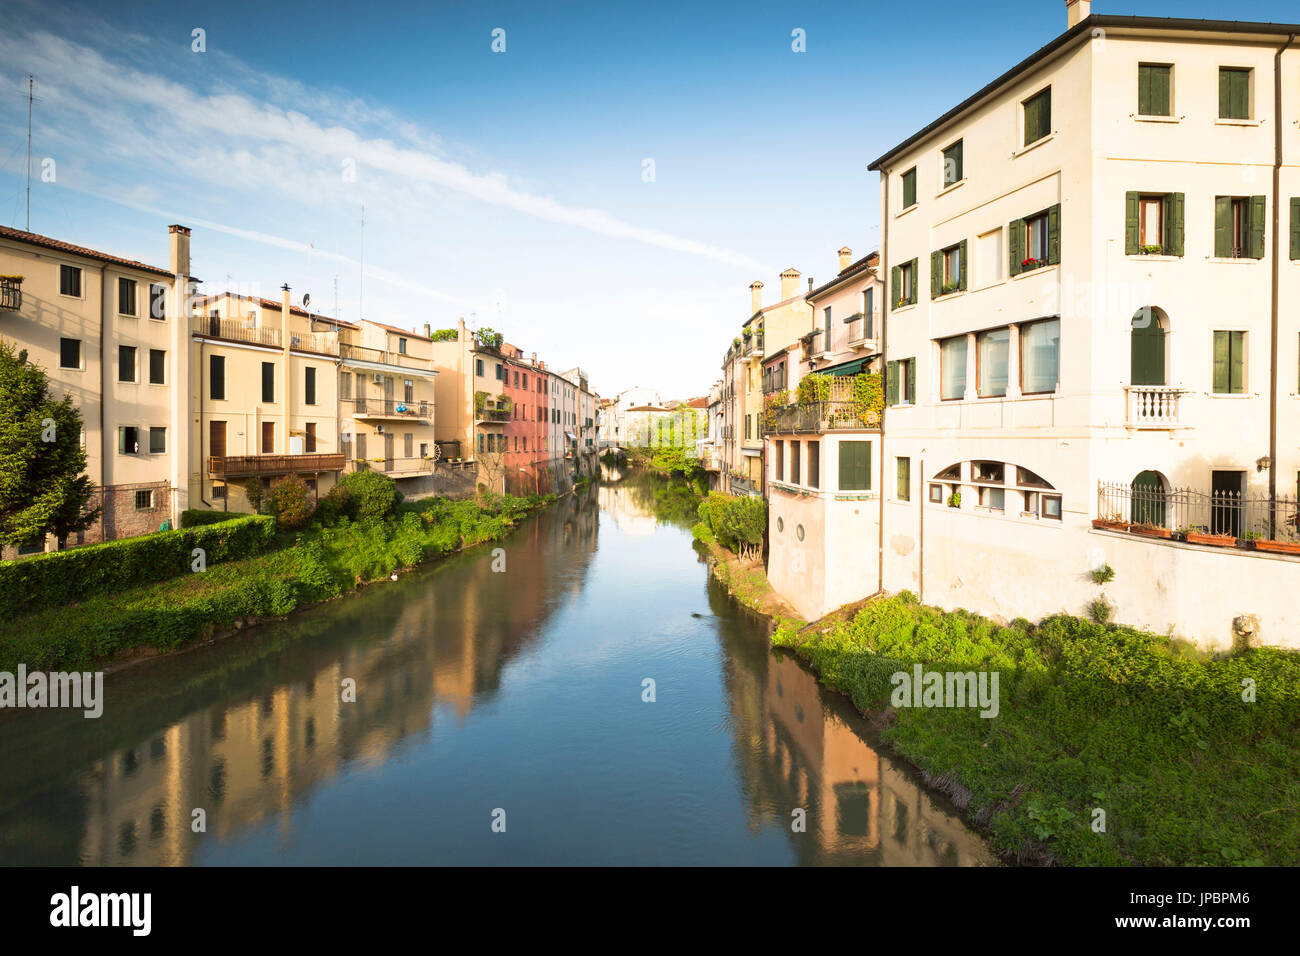 a view of one of the typical canals in the centre of Padua with historical buildings on his sides, Padua province, Veneto, Italy, Europe Stock Photo